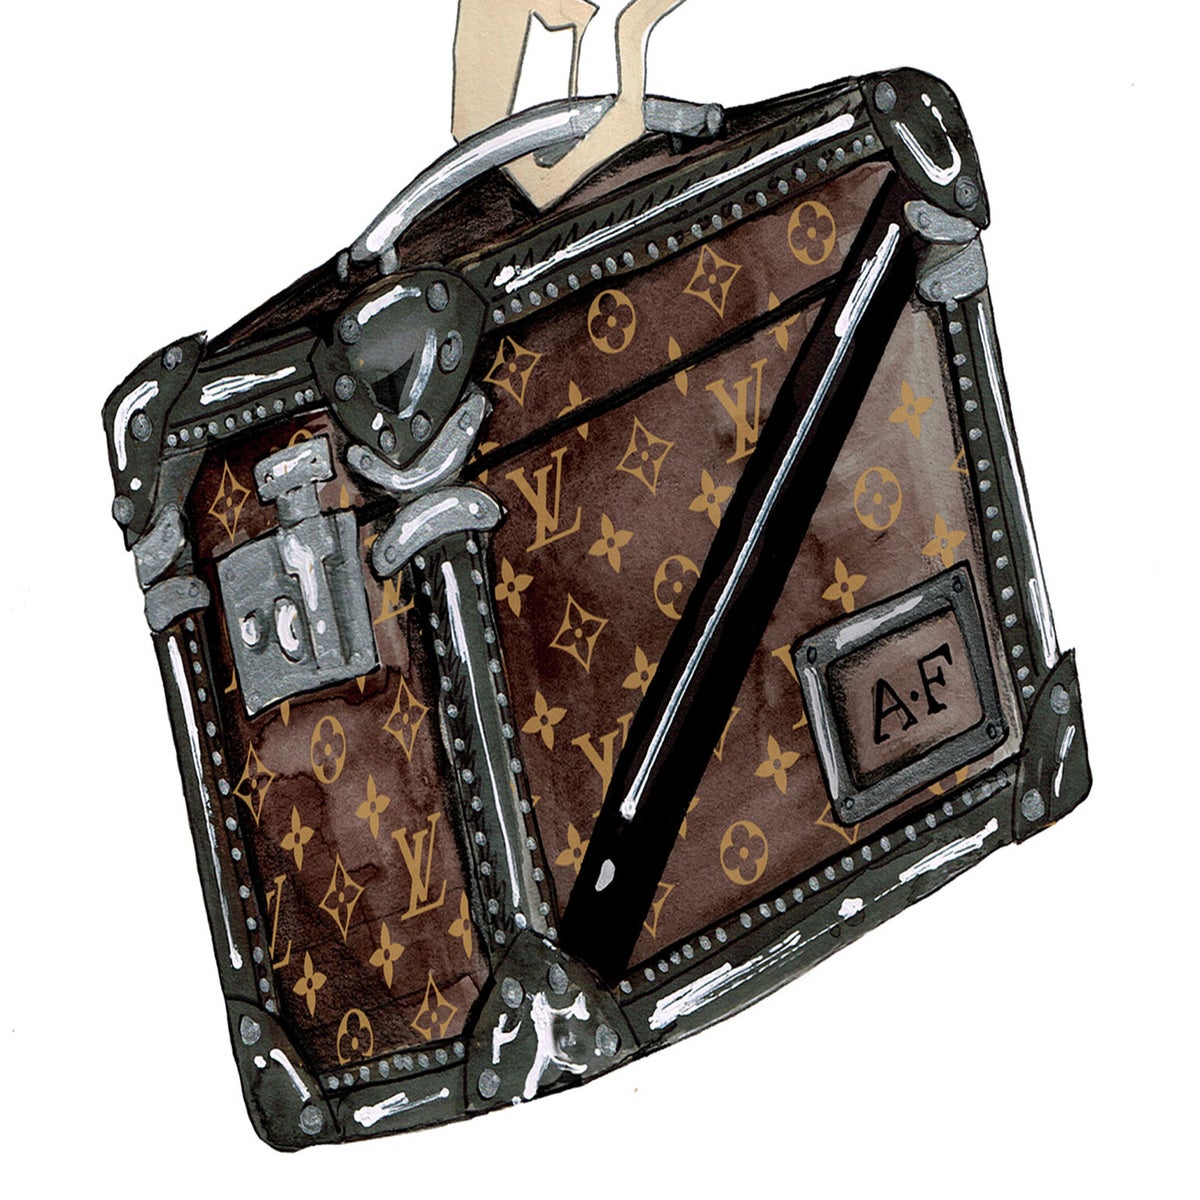 Shaped as a tiny monogrammed trunk Louis Vuitton has unveiled the